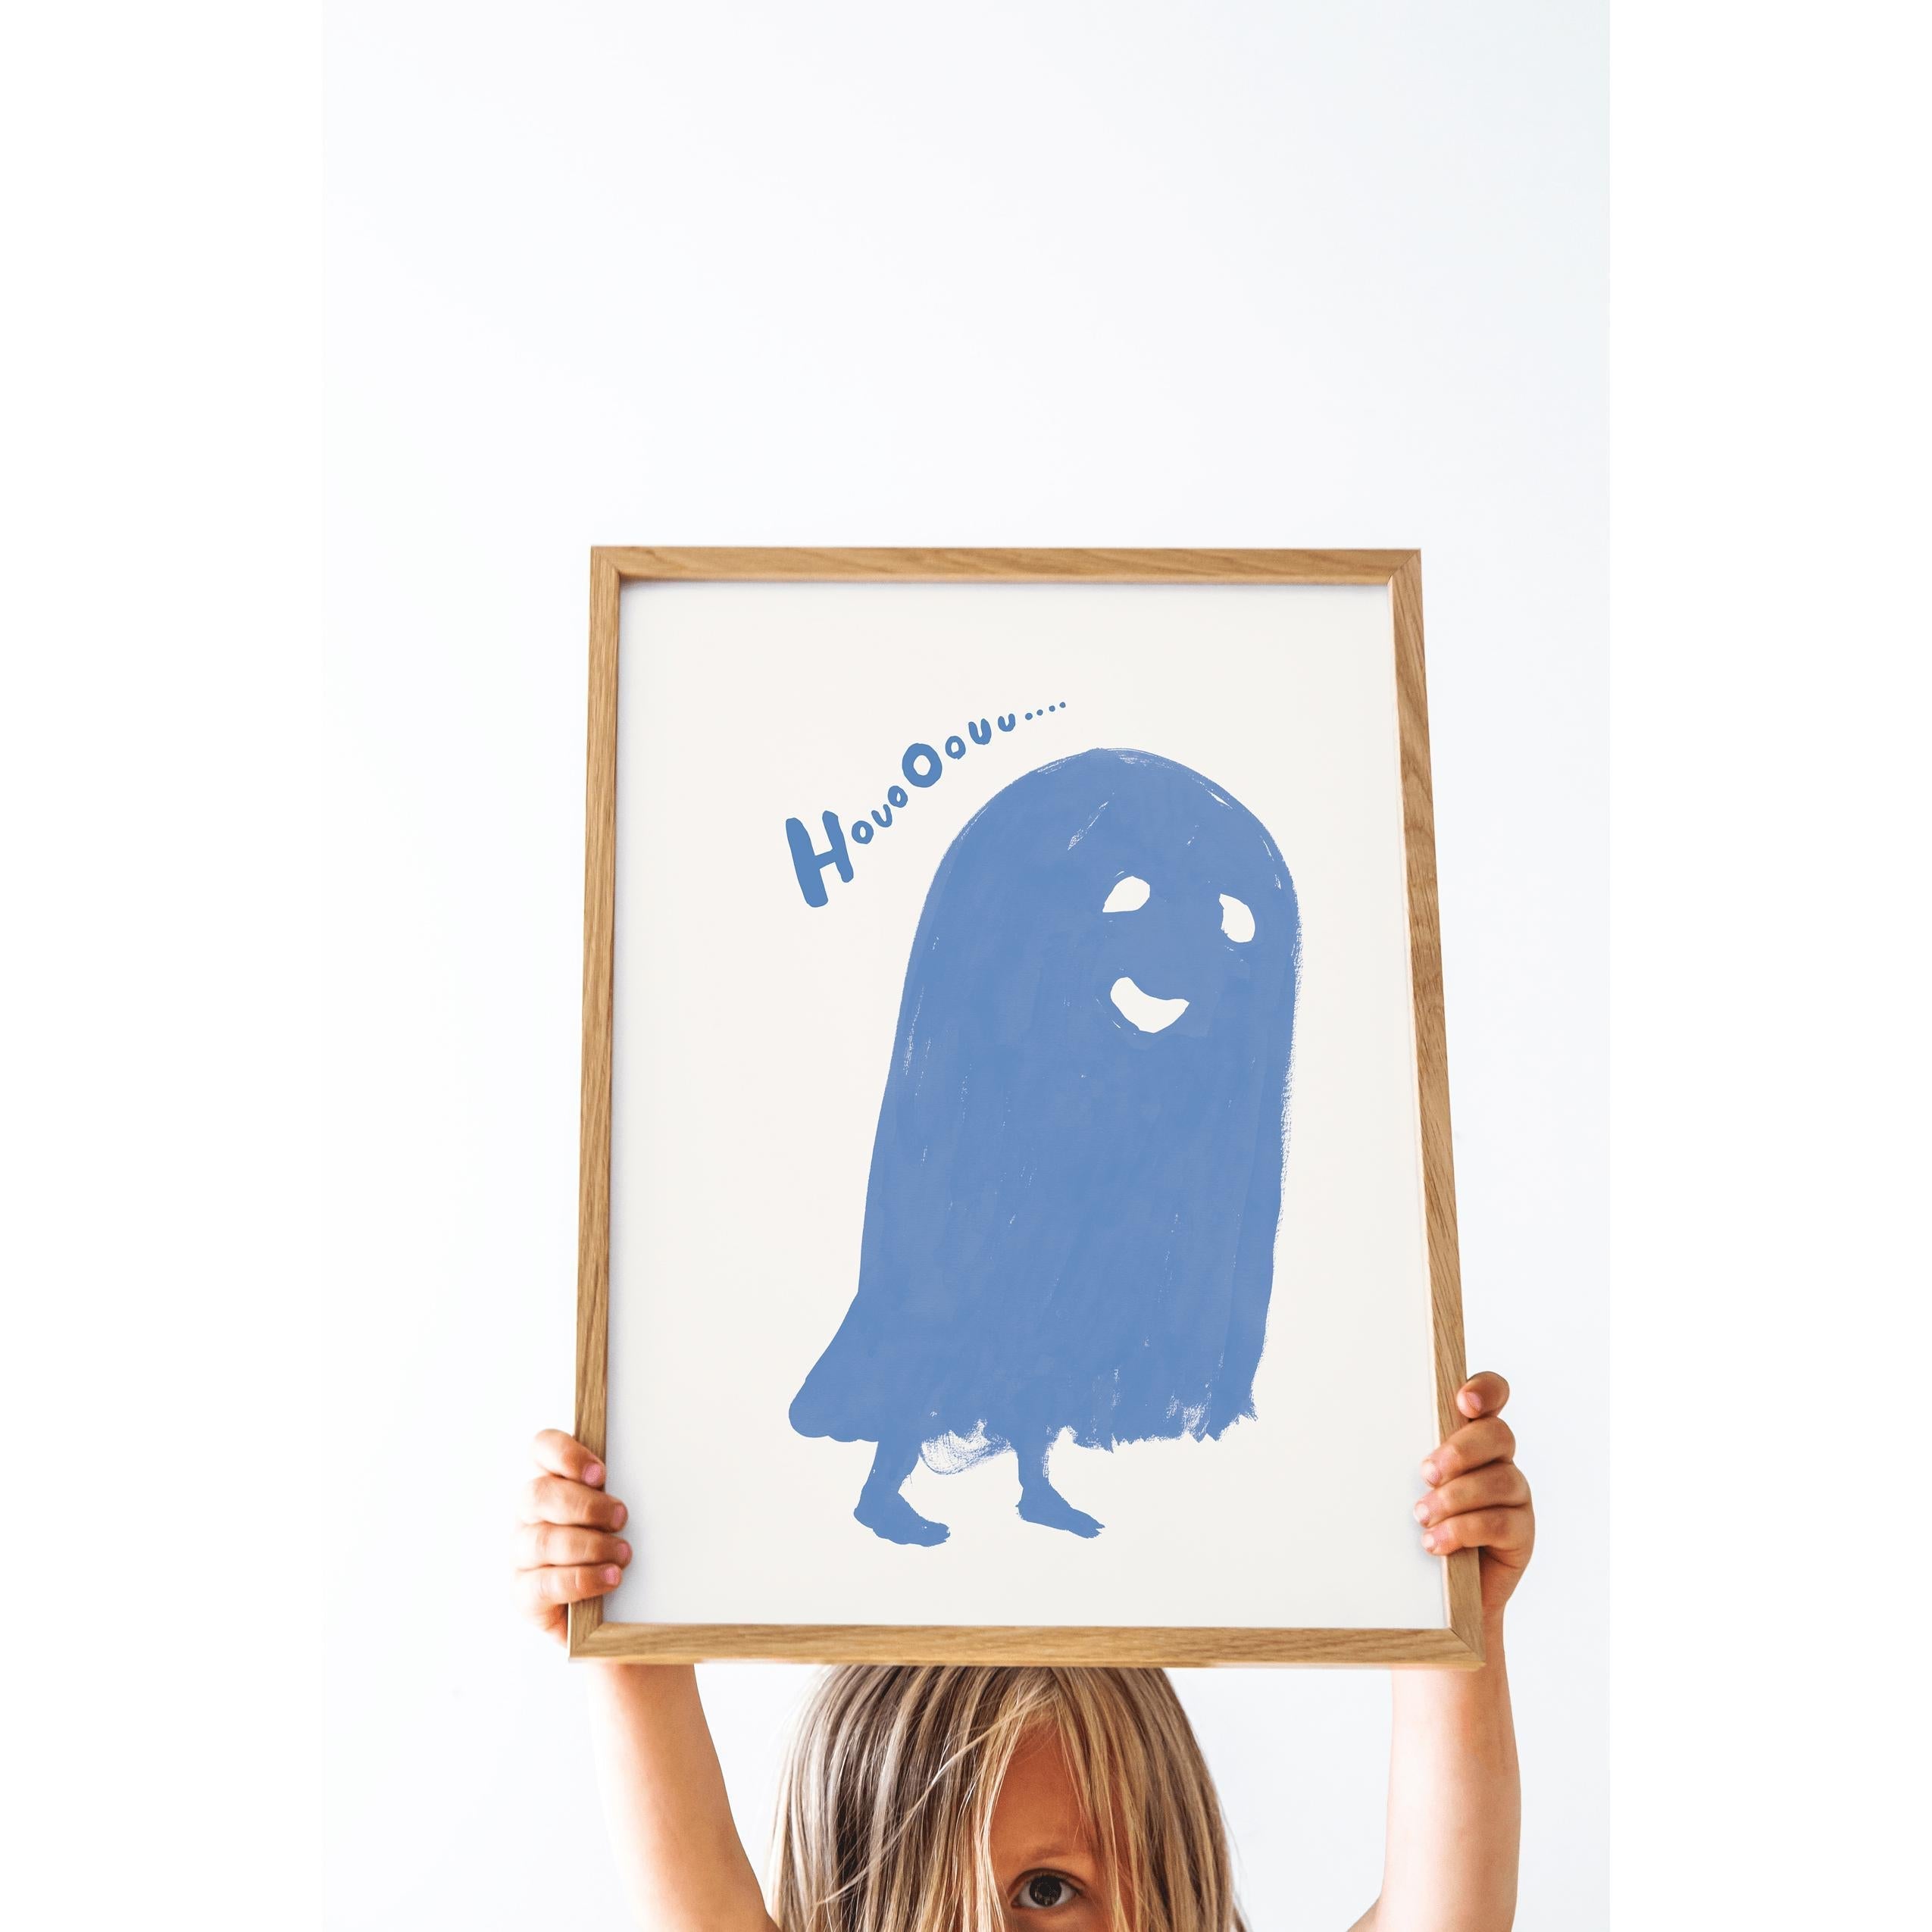 Paper Collective Houo Oouu Poster 30x40 Cm, Blue